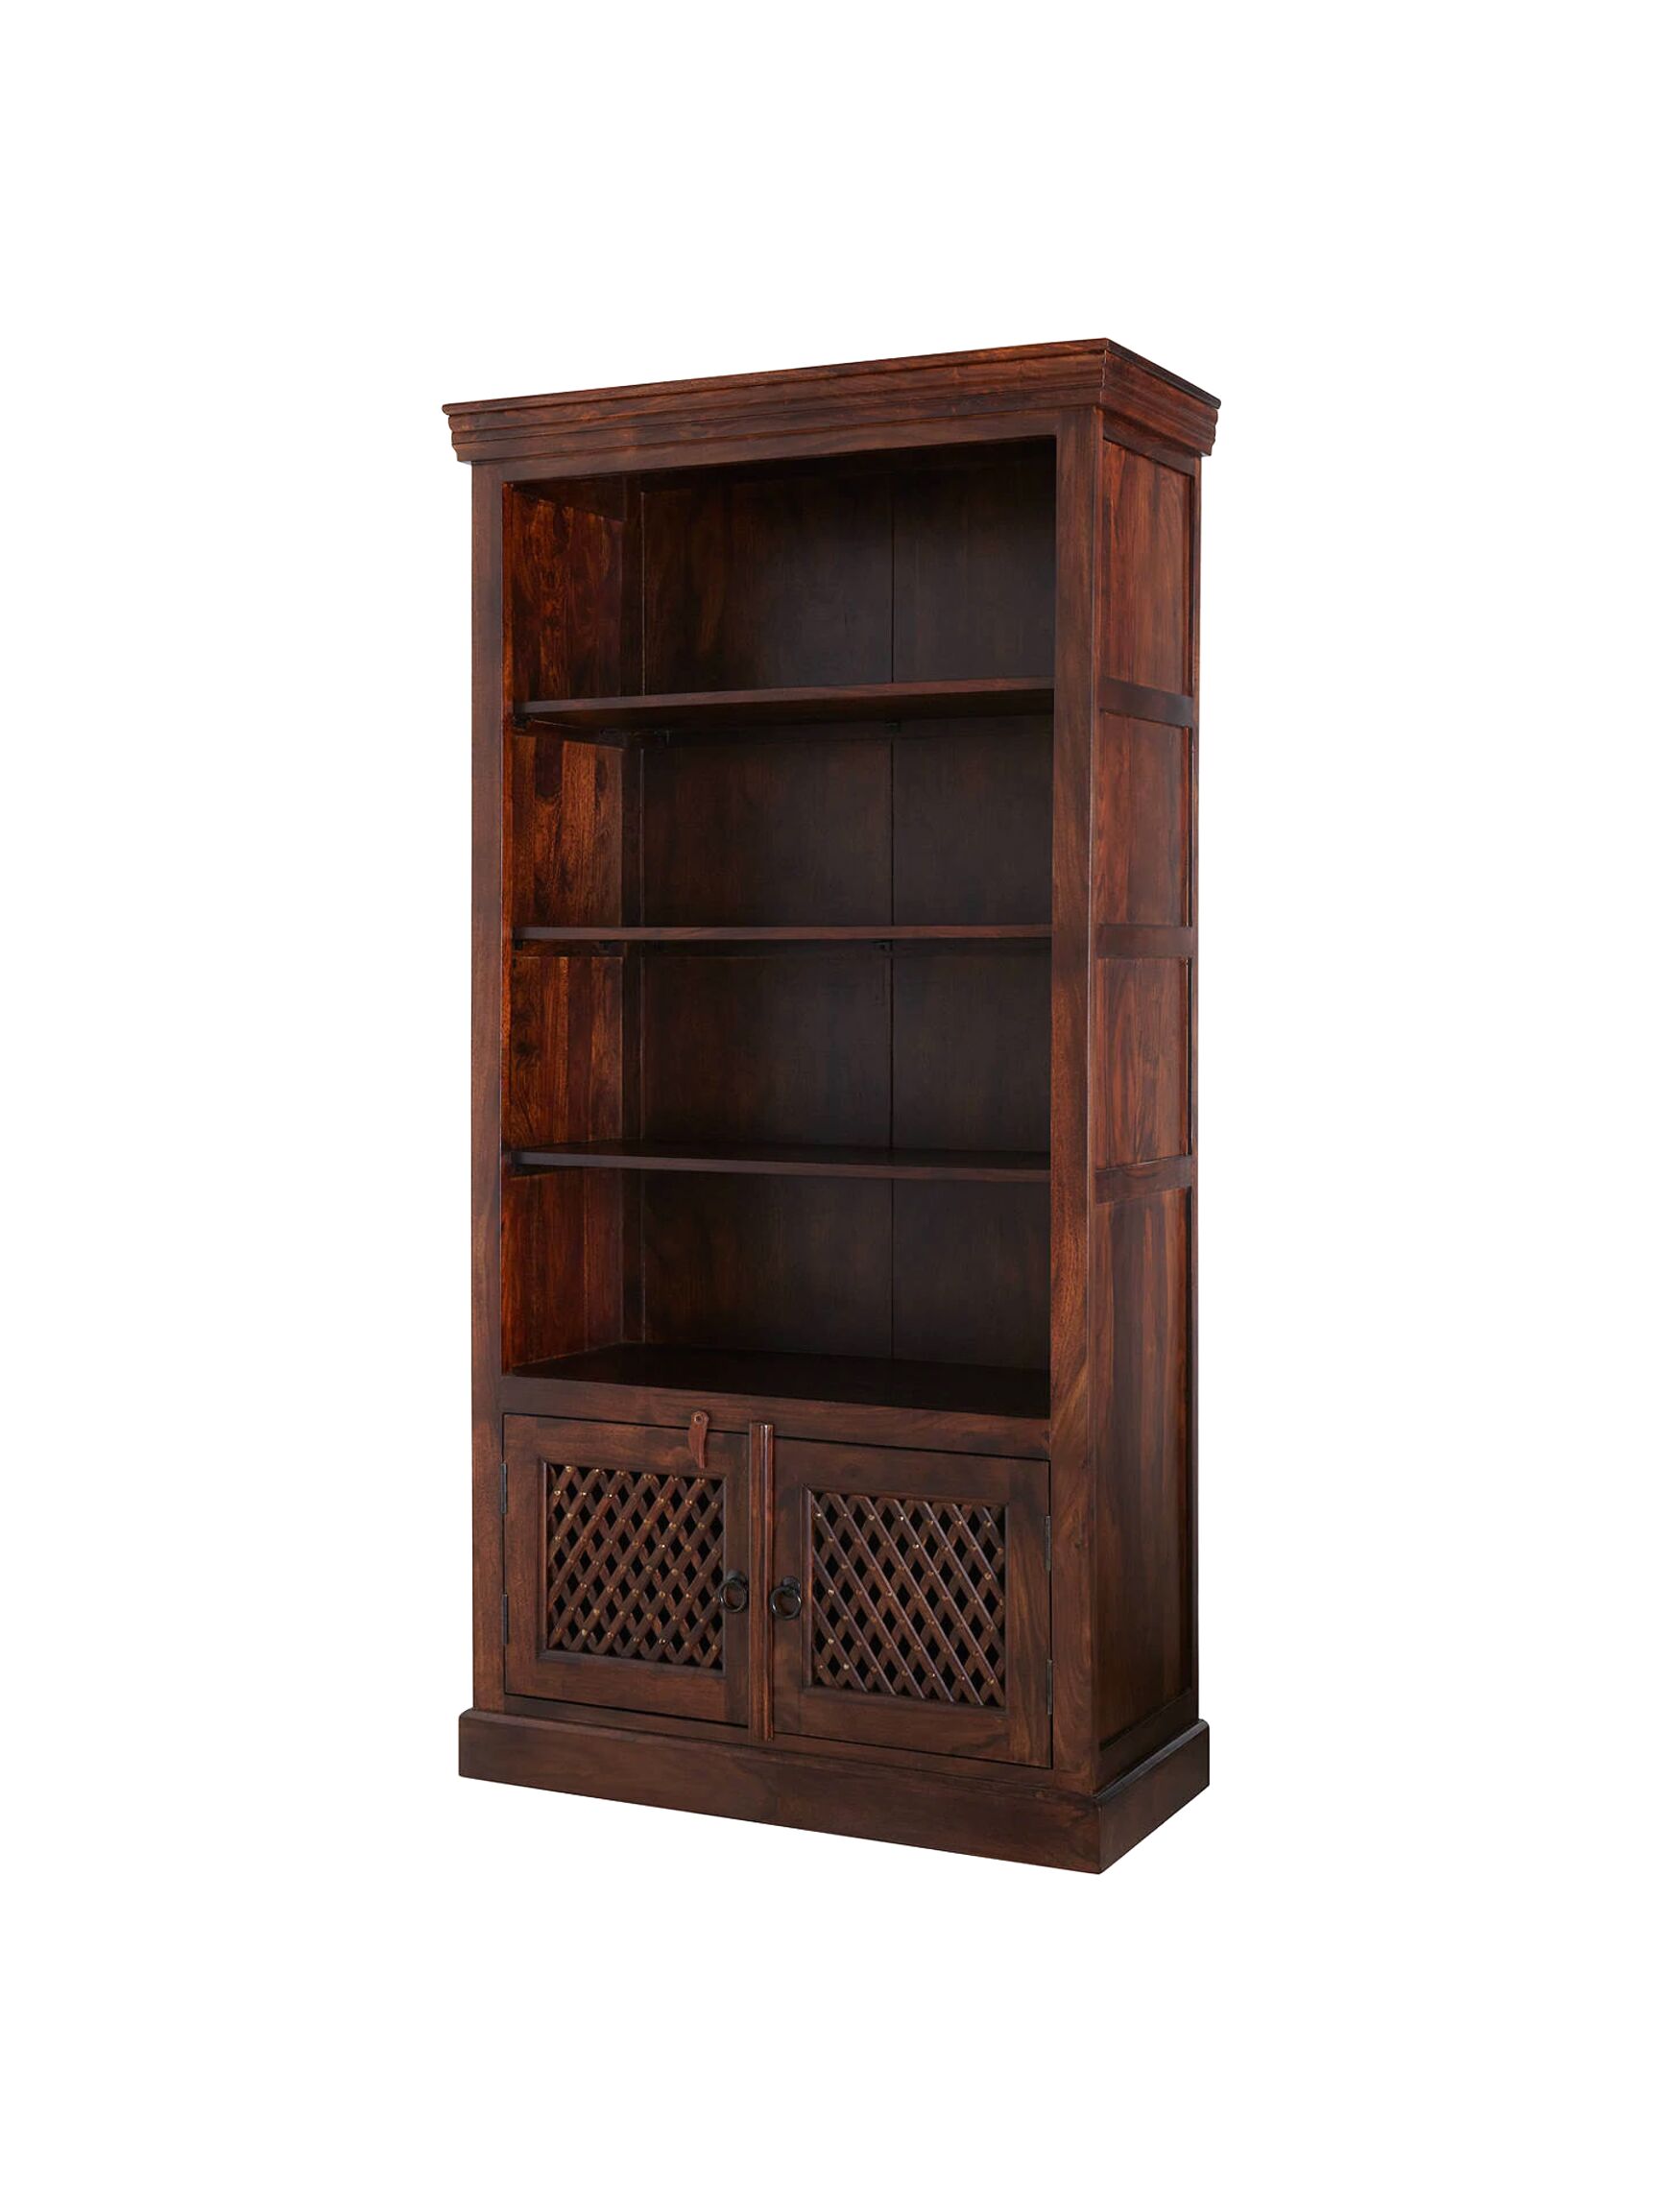 John Lewis Bookcase For Sale In Uk View 29 Bargains